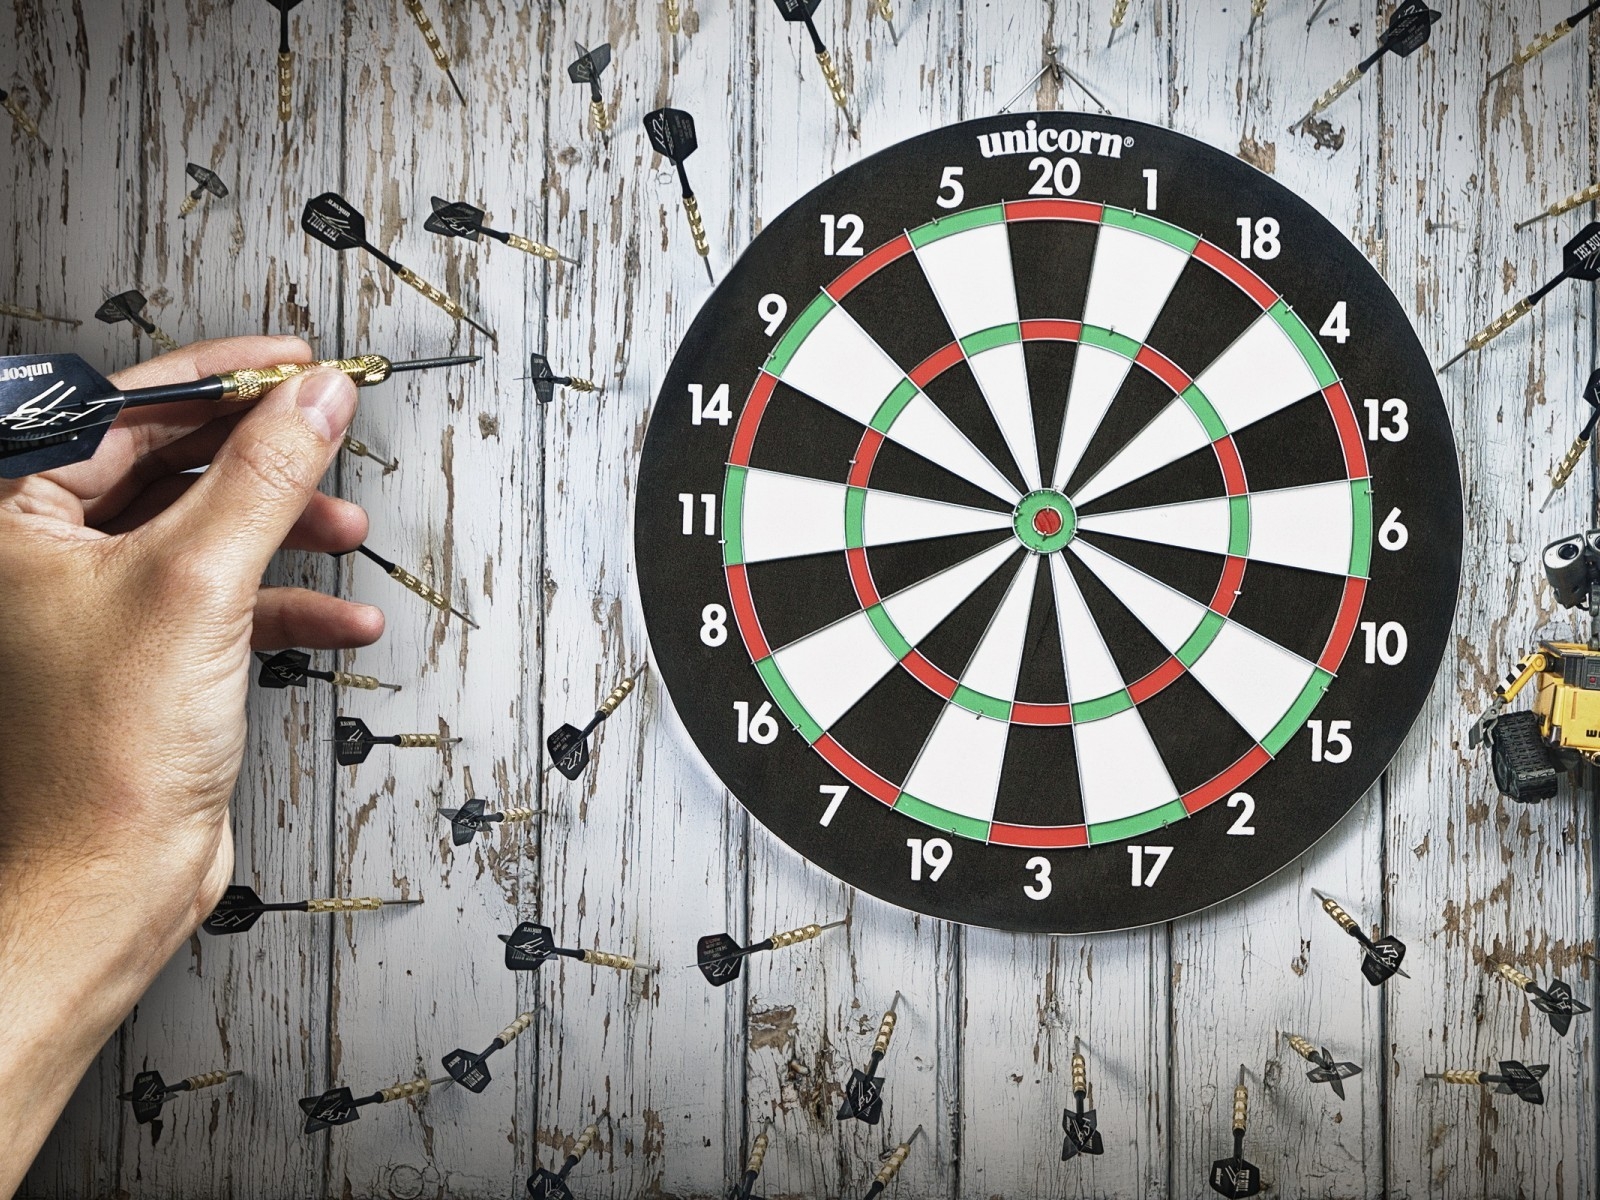 Darts Game for 1600 x 1200 resolution